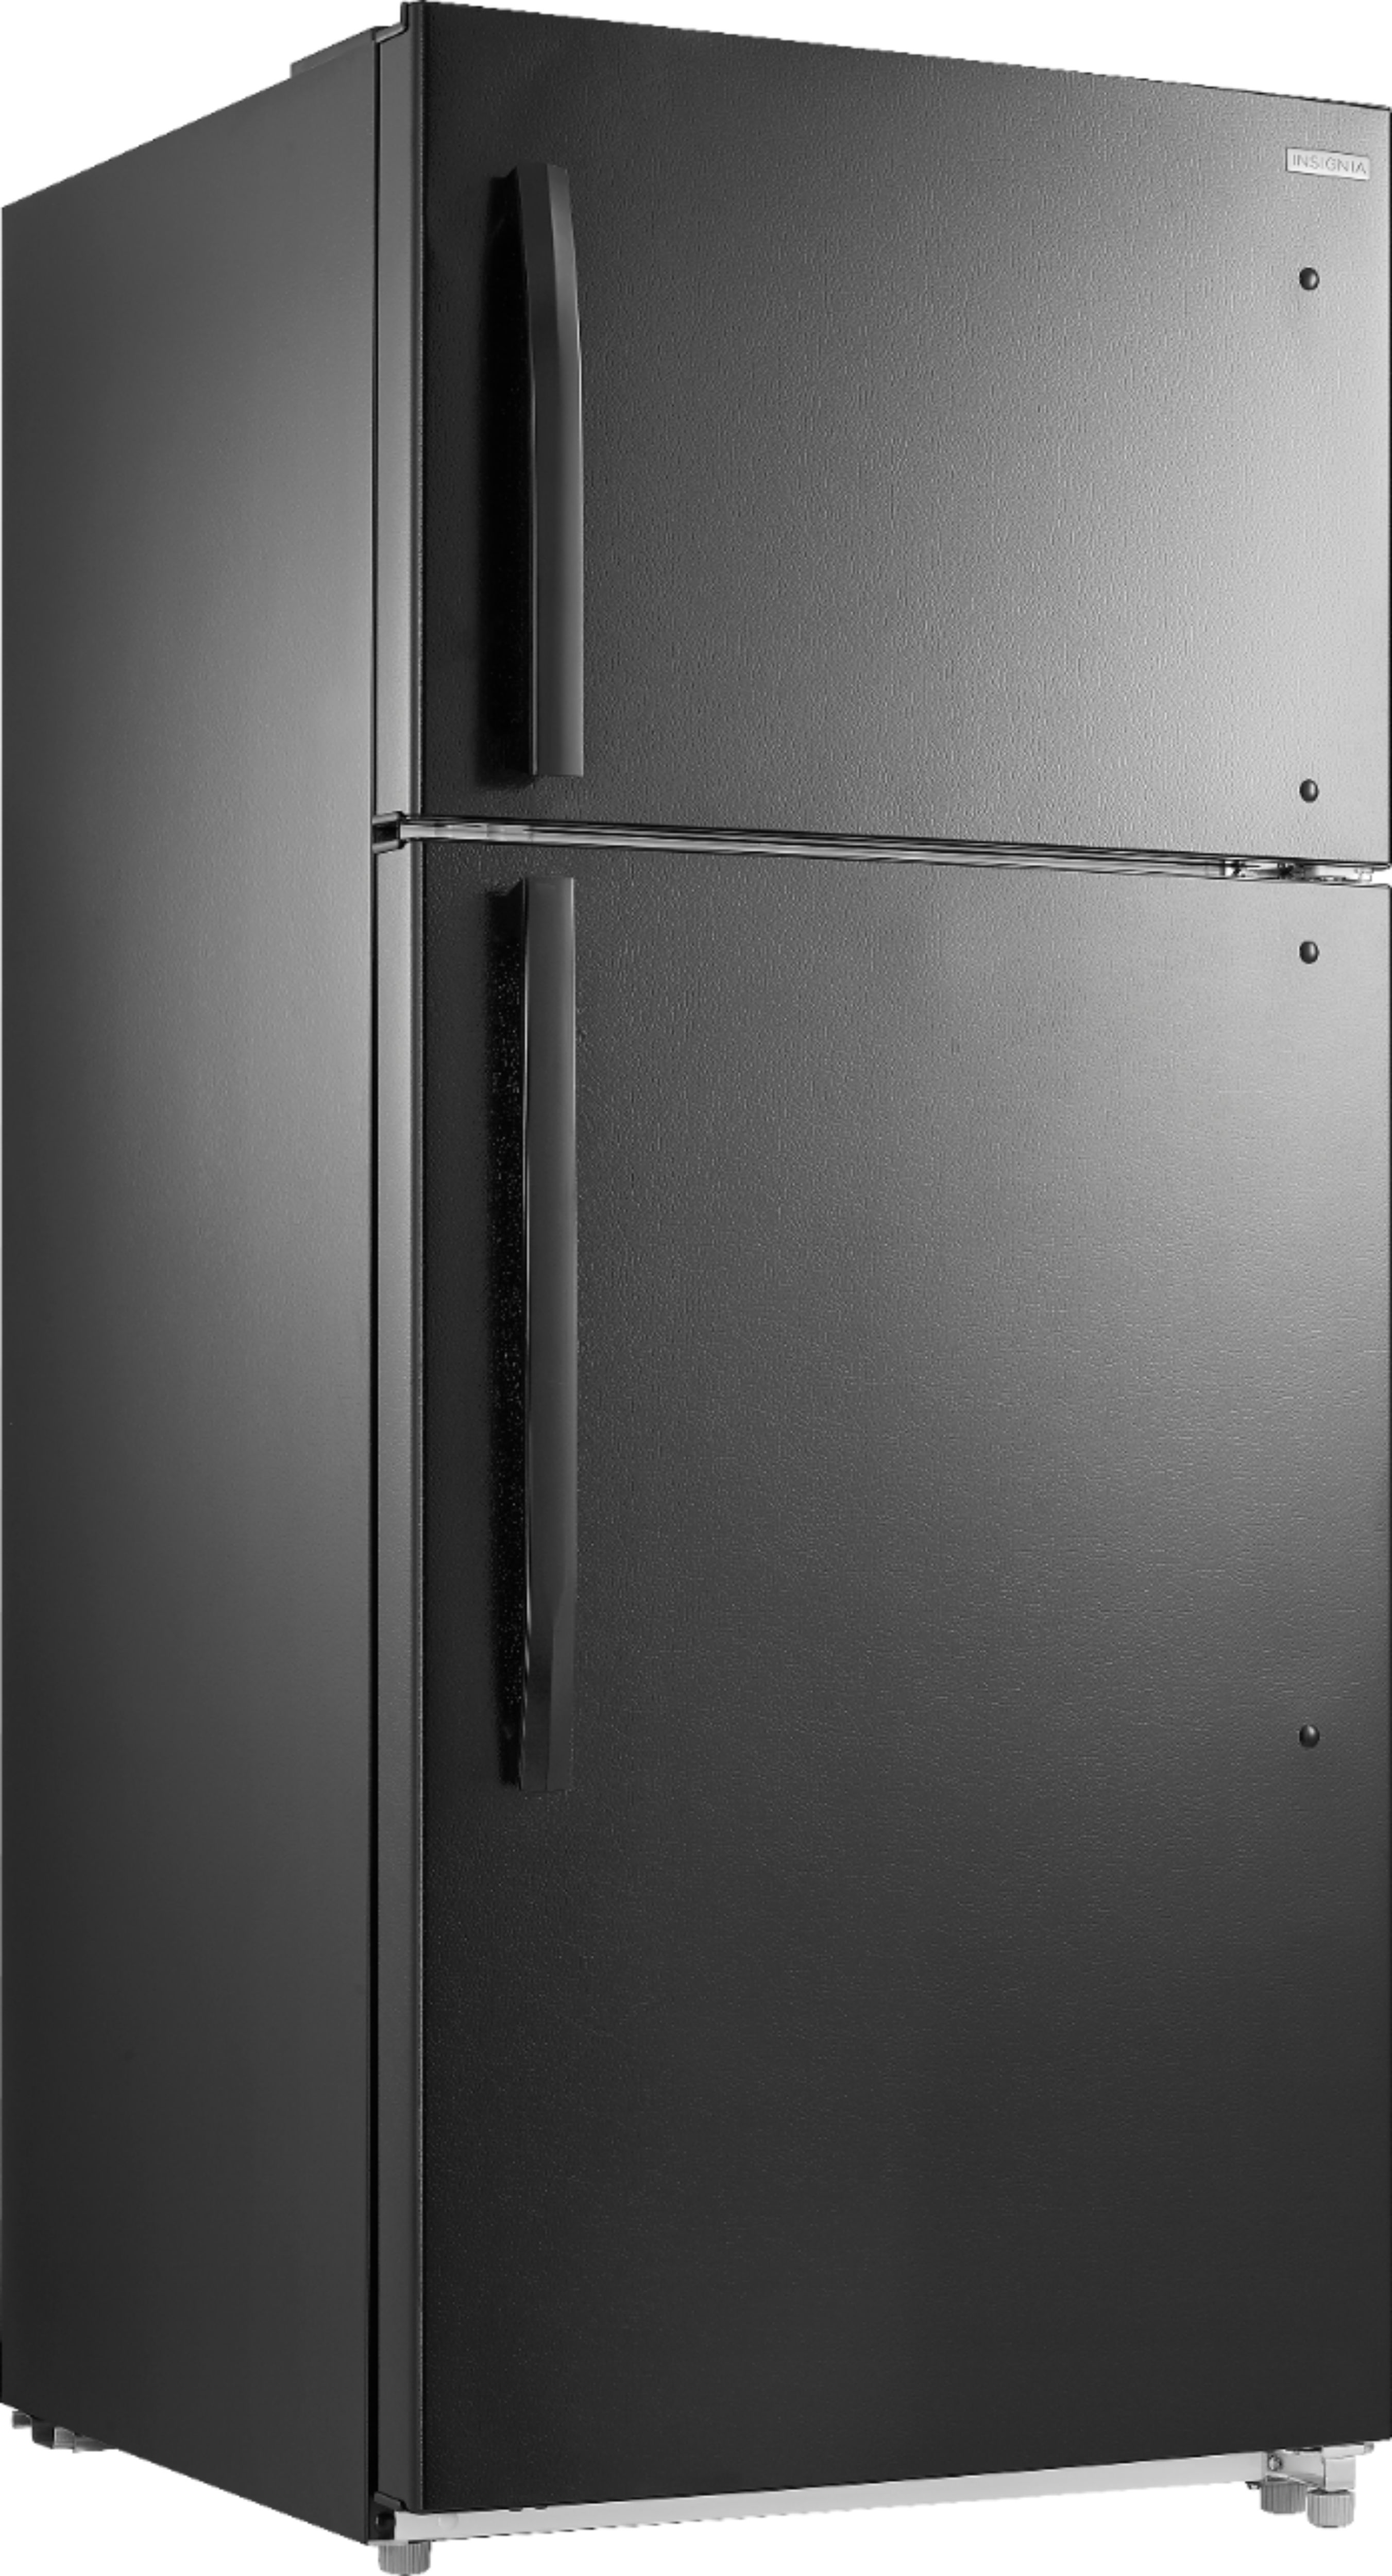 Angle View: LG LSXC22396S - Refrigerator/freezer - side-by-side with water dispenser, ice dispenser - Wi-Fi - width: 35.9 in - depth: 29.4 in - height: 70.5 in - 21.7 cu. ft - stainless steel